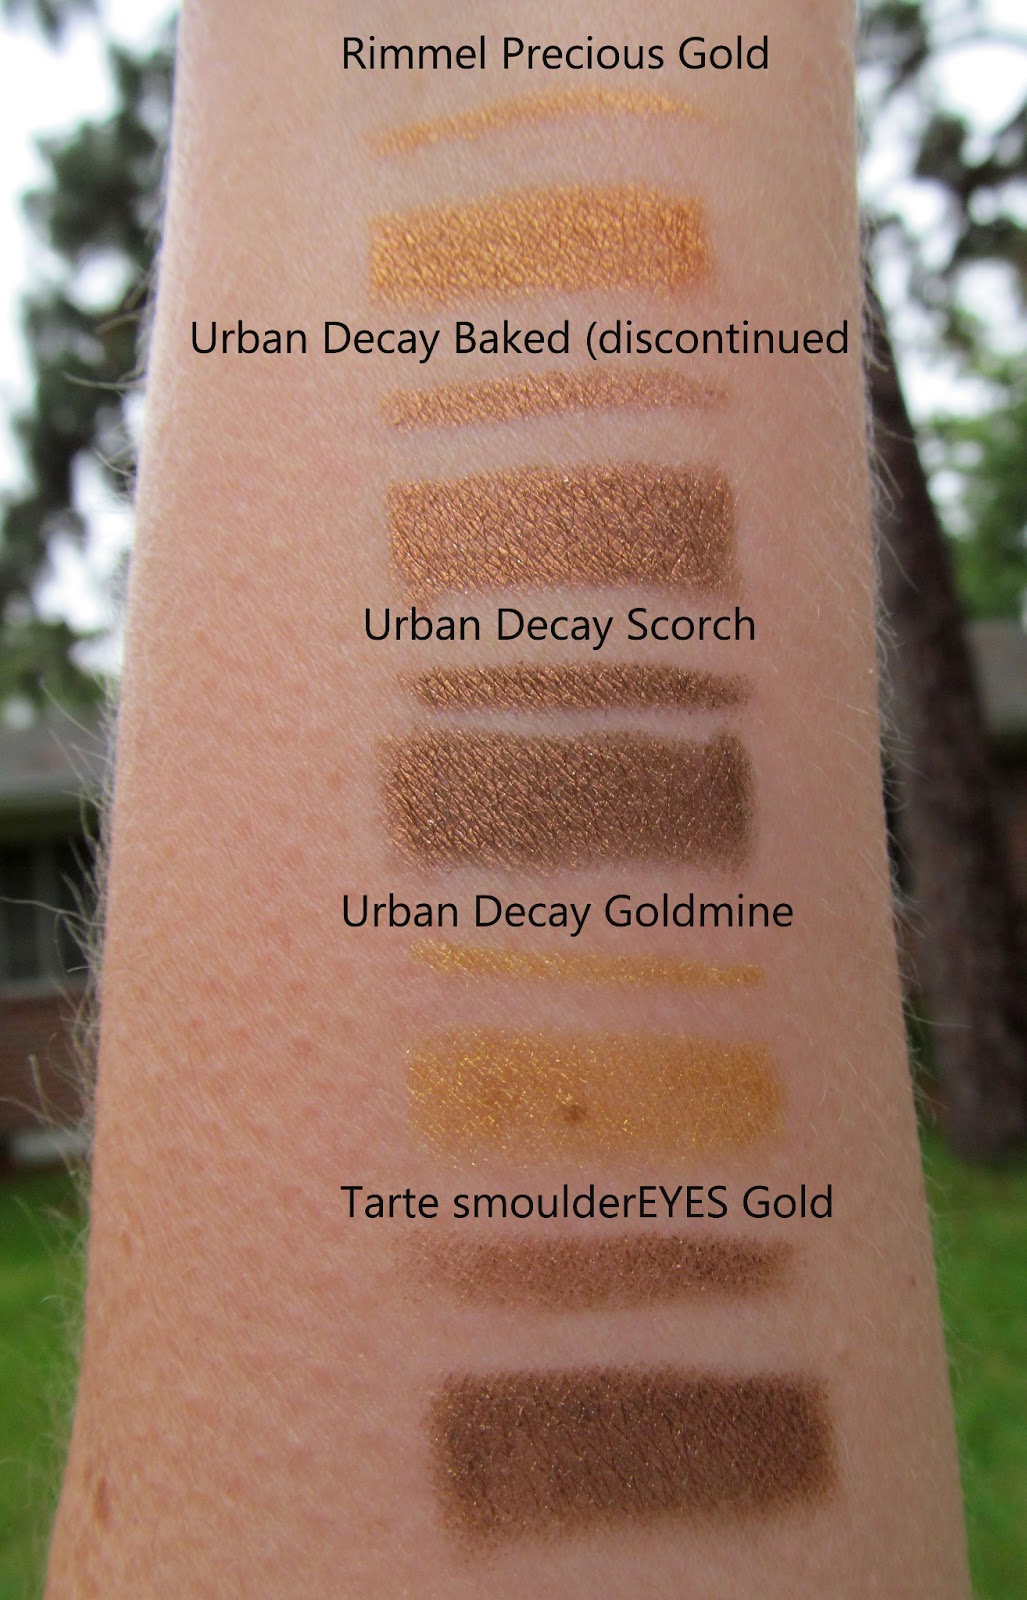 Bon Vivant Beauty: Rimmel Exaggerate Waterproof Eye Definer in Precious Gold: and Swatches